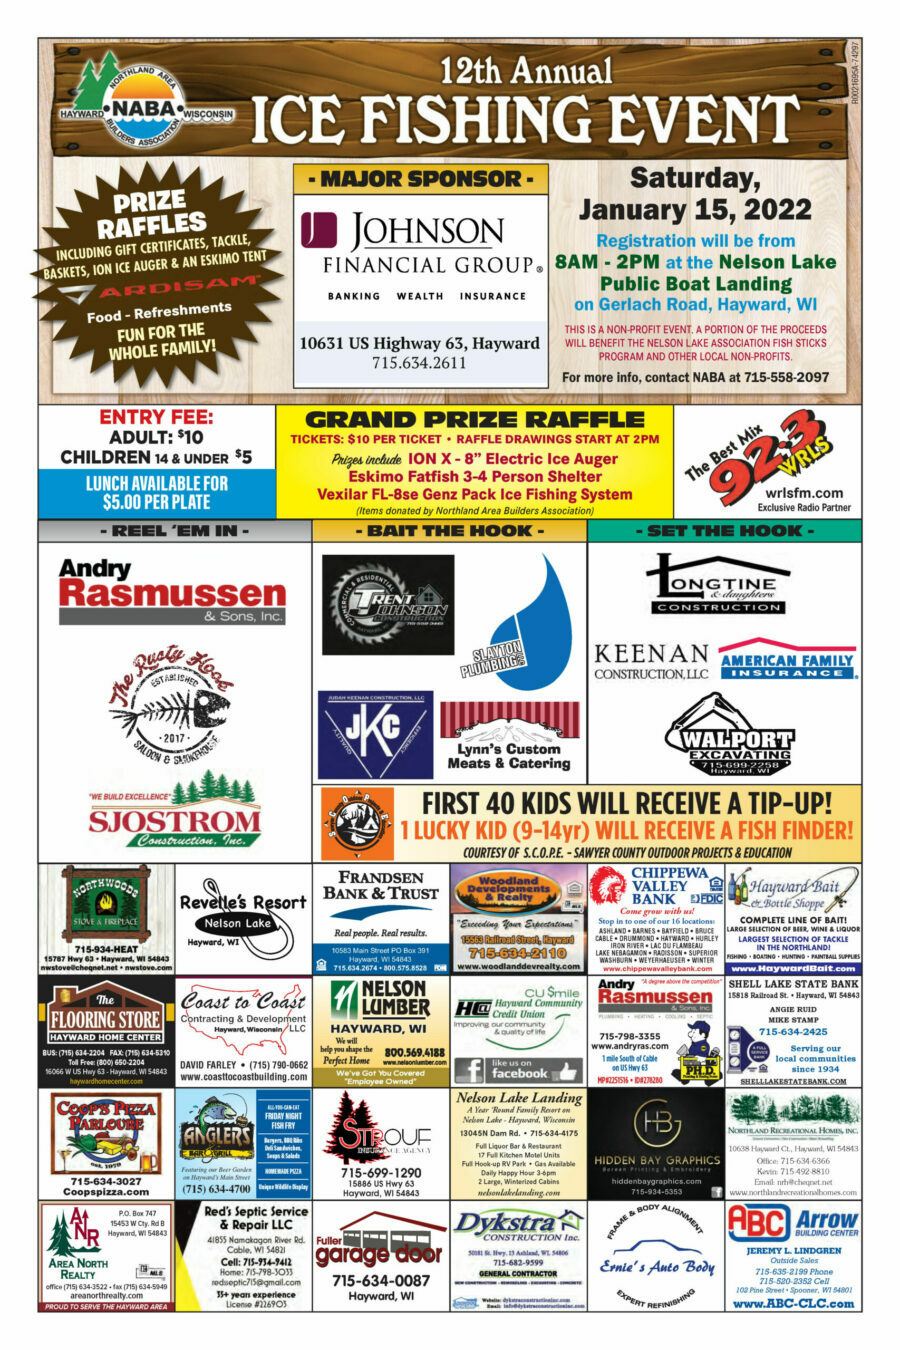 northland-area-builders-ice-fishing-contest-2022